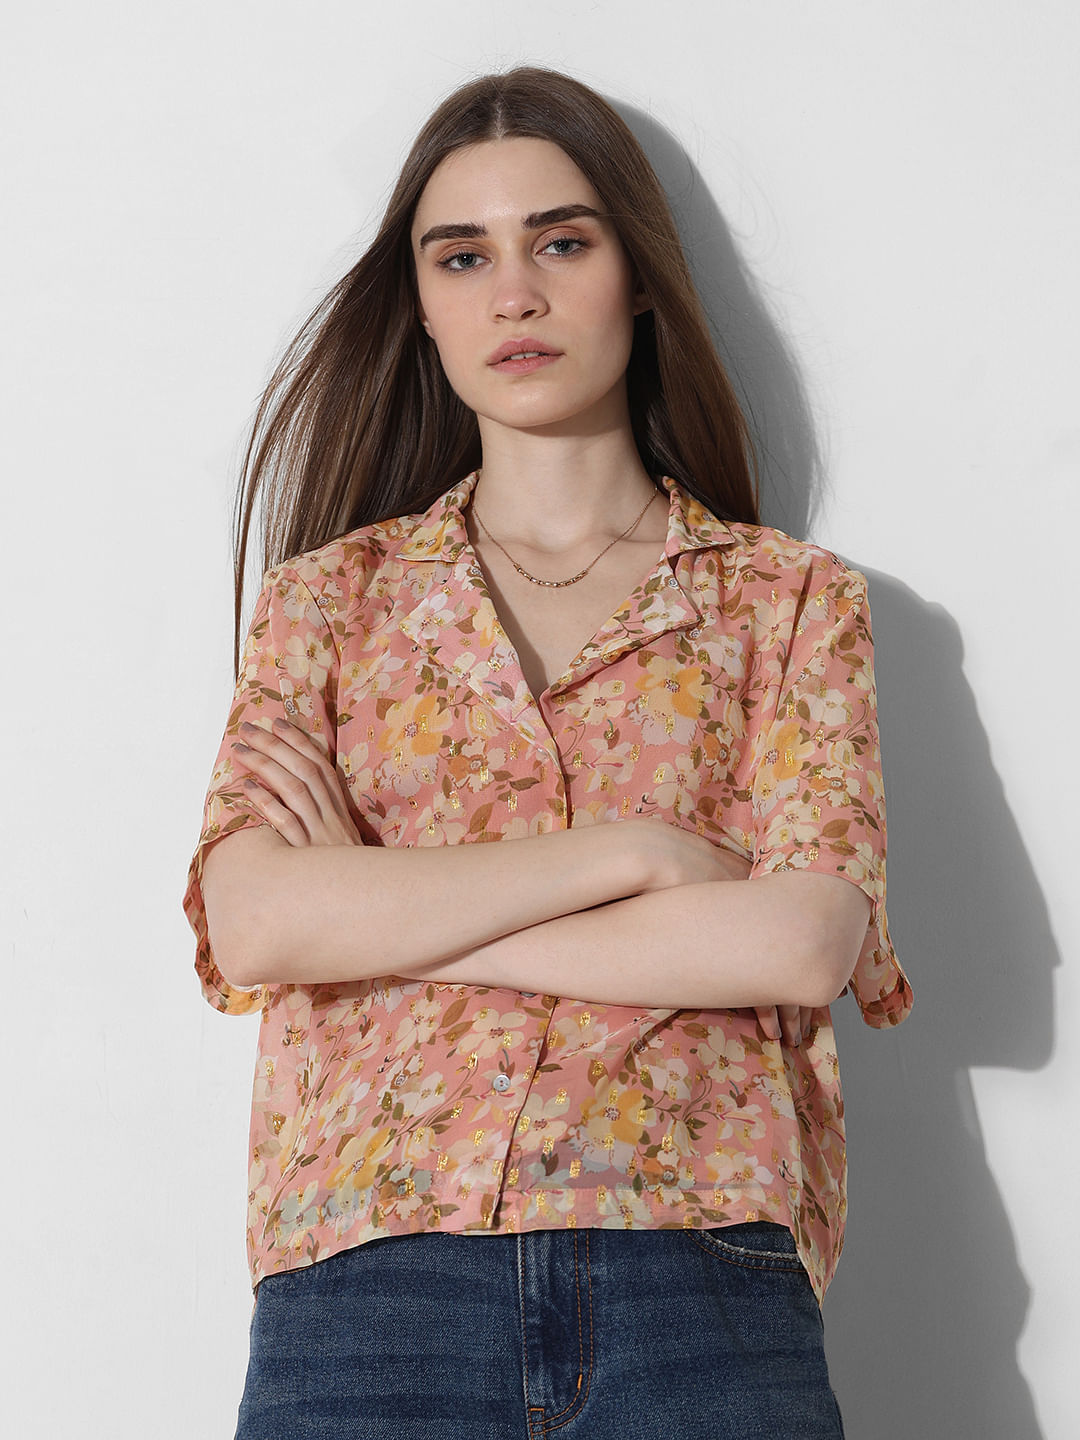 Summer Tops for Women Casual Vintage Floral Print Short Sleeve Shirts  Fashion Loose Fit Twist Front Crewneck T-Shirts - Walmart.com